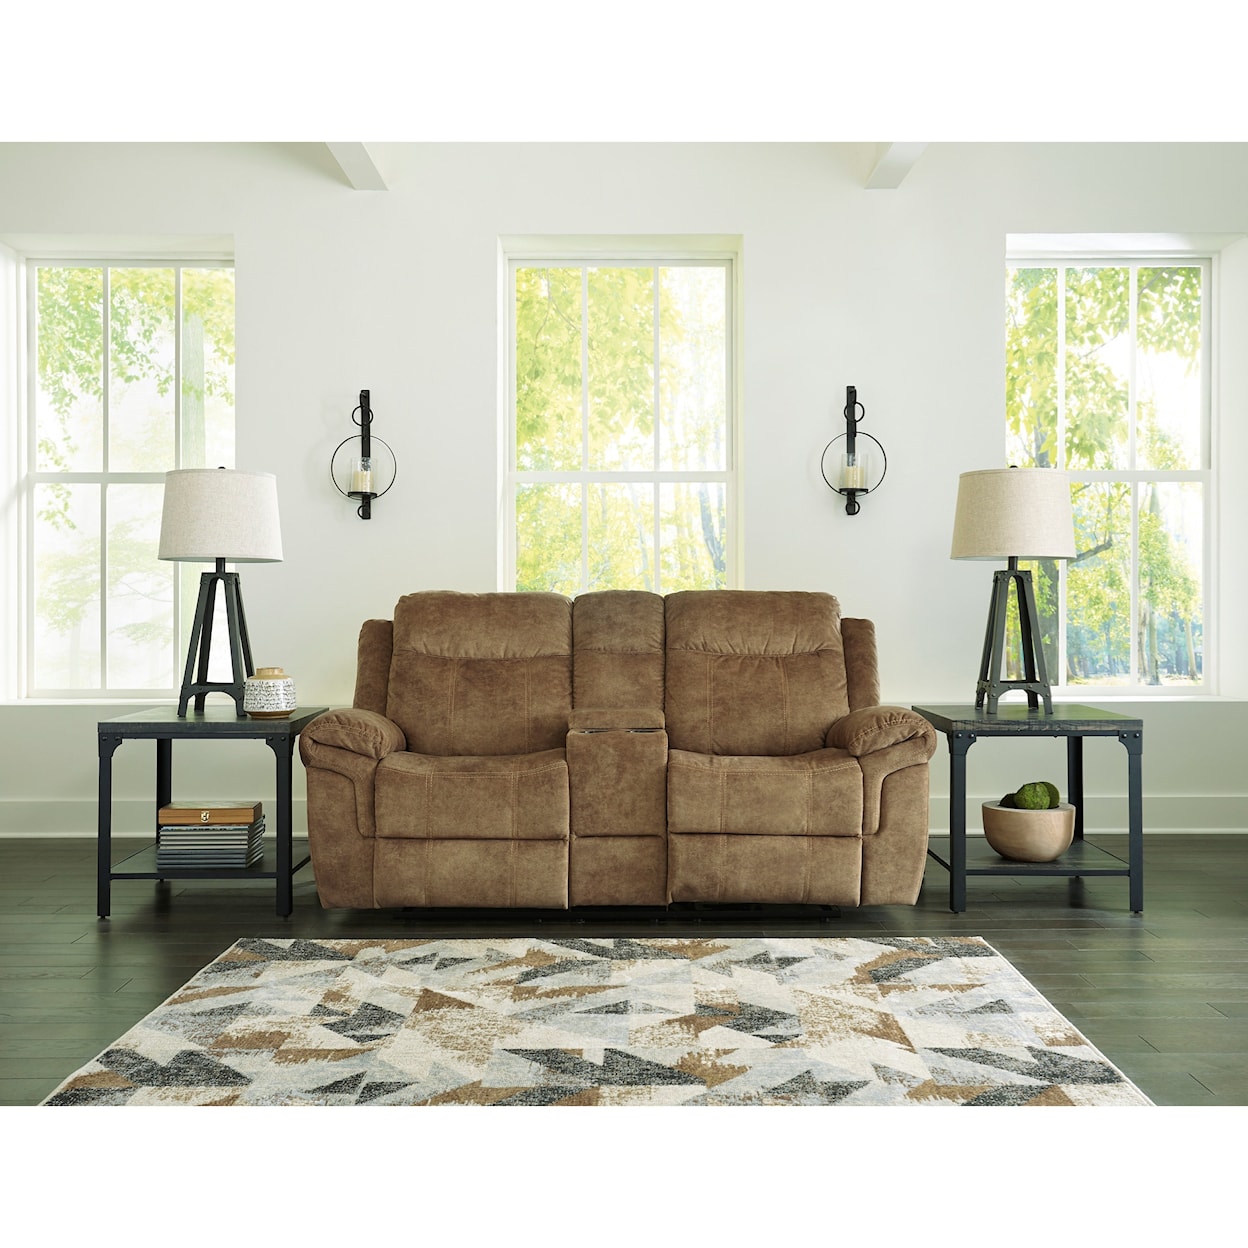 Signature Design by Ashley Furniture Huddle-Up Double Reclining Loveseat w/ Console